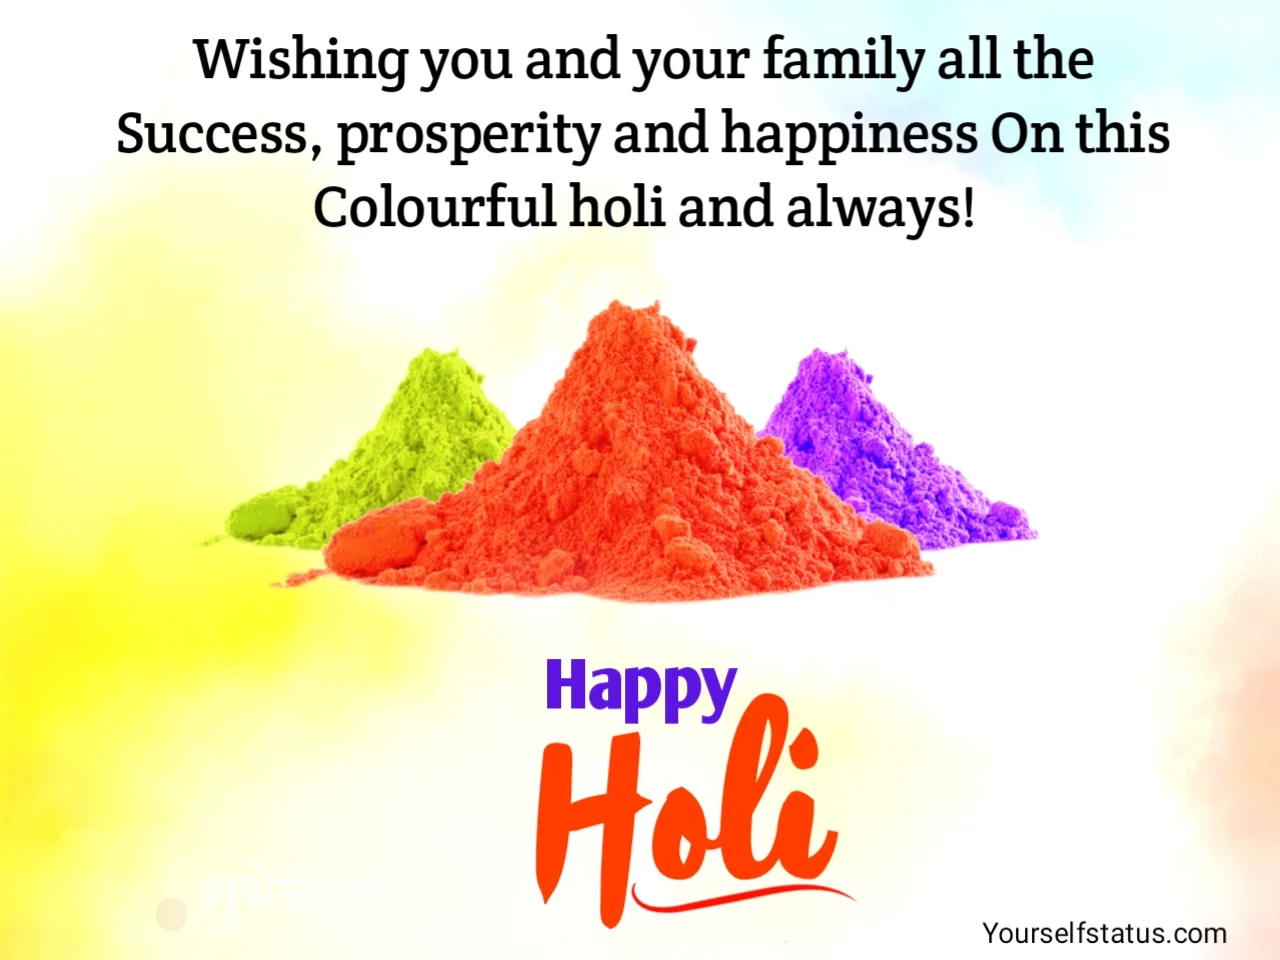 Happy Holi images in english